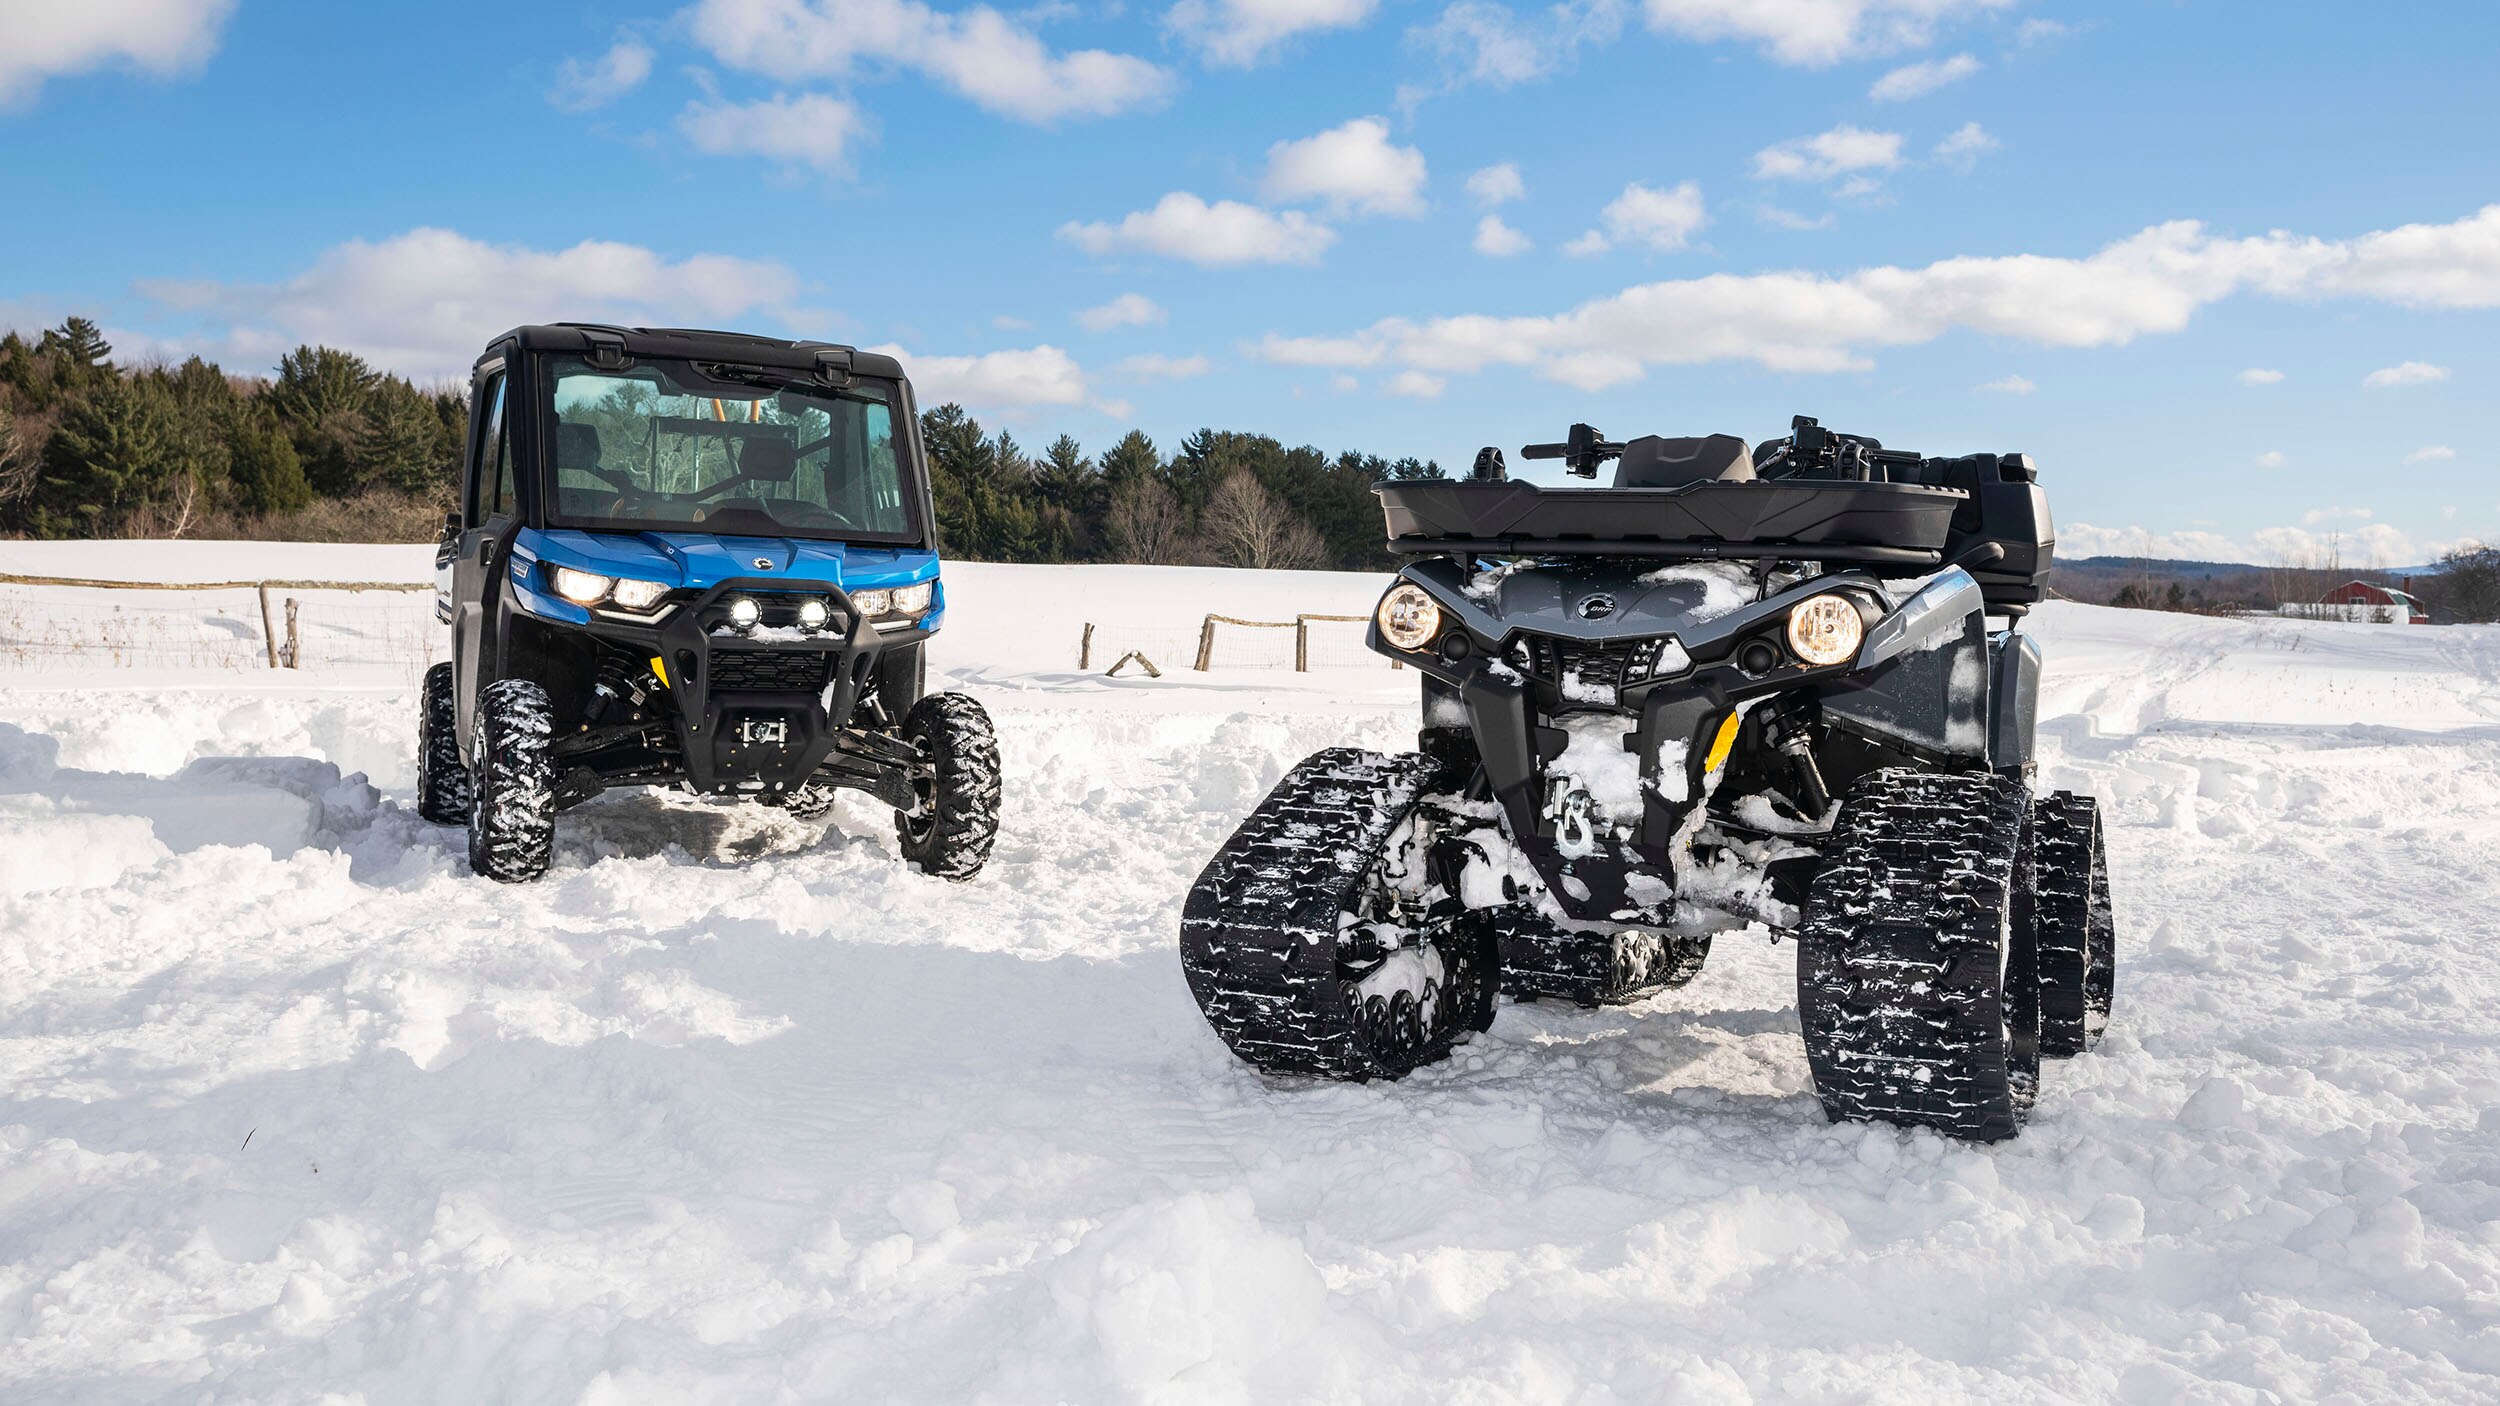 Full view of two Can-Am vehicles outside